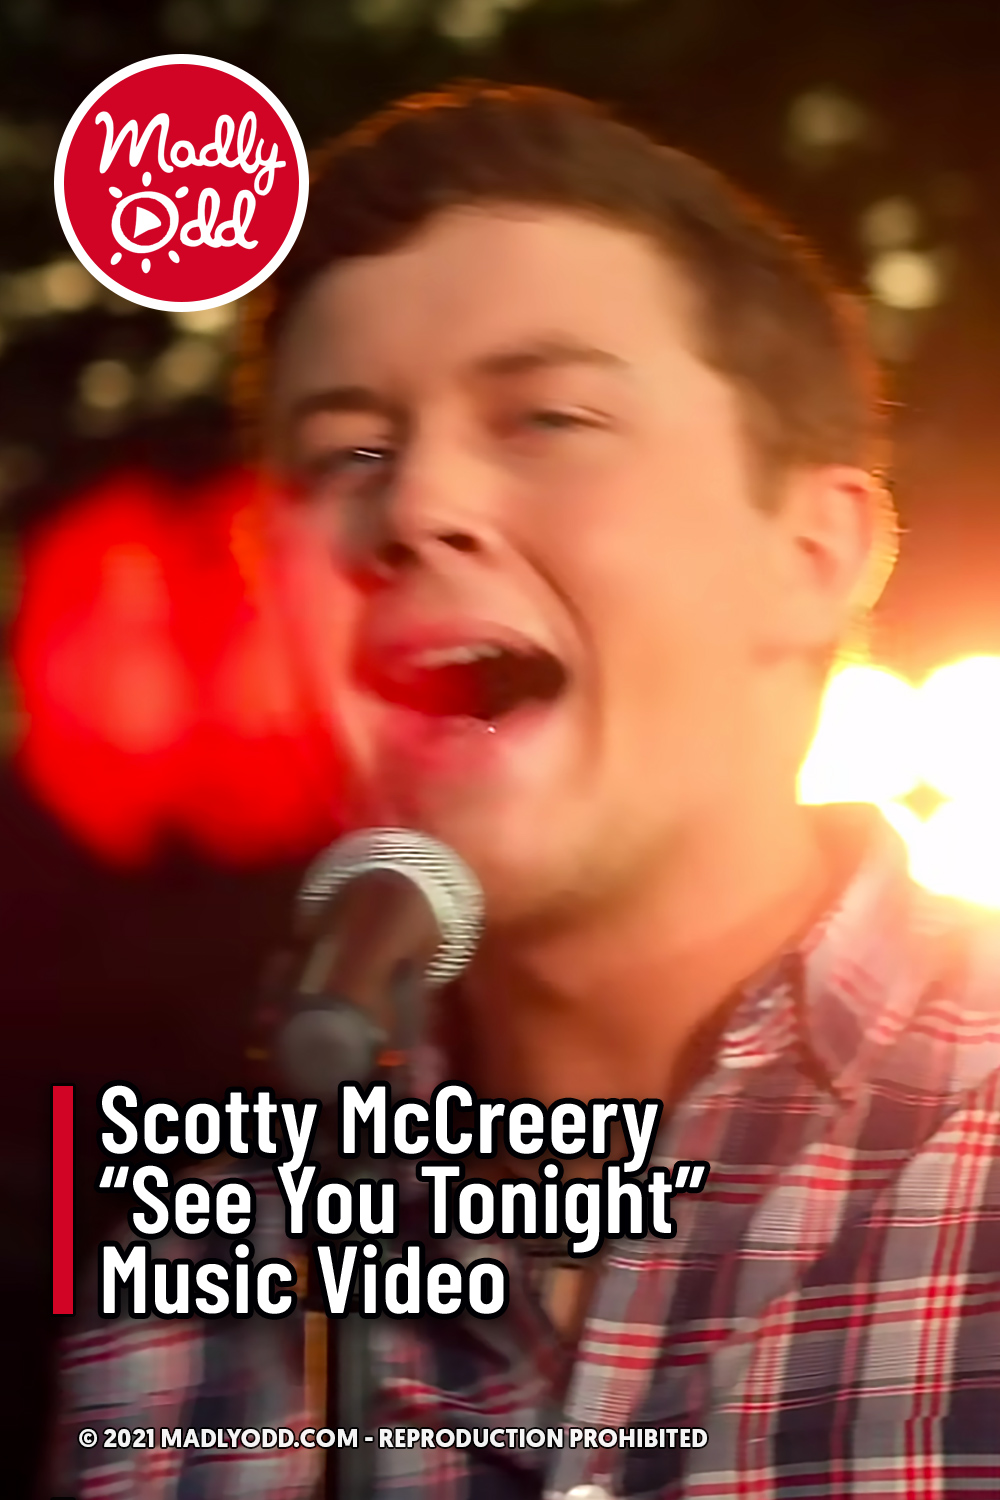 Scotty McCreery “See You Tonight” Music Video